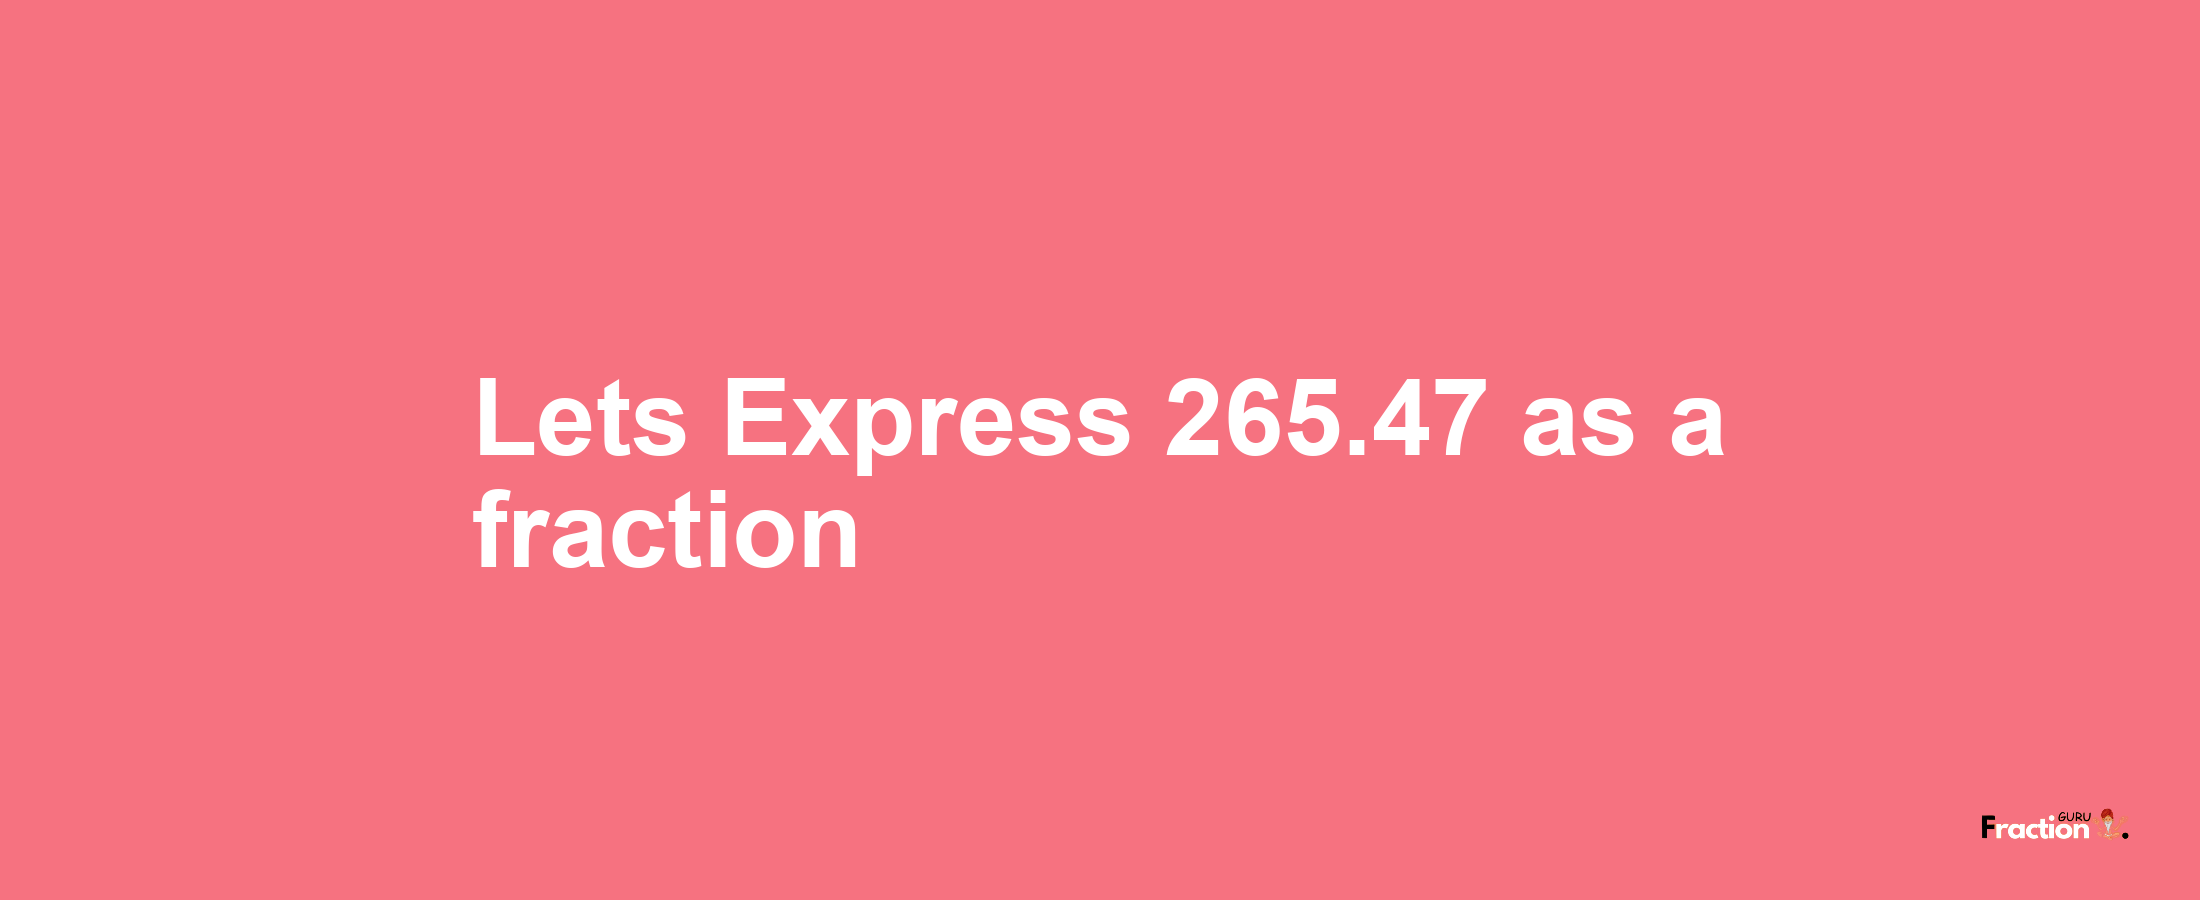 Lets Express 265.47 as afraction